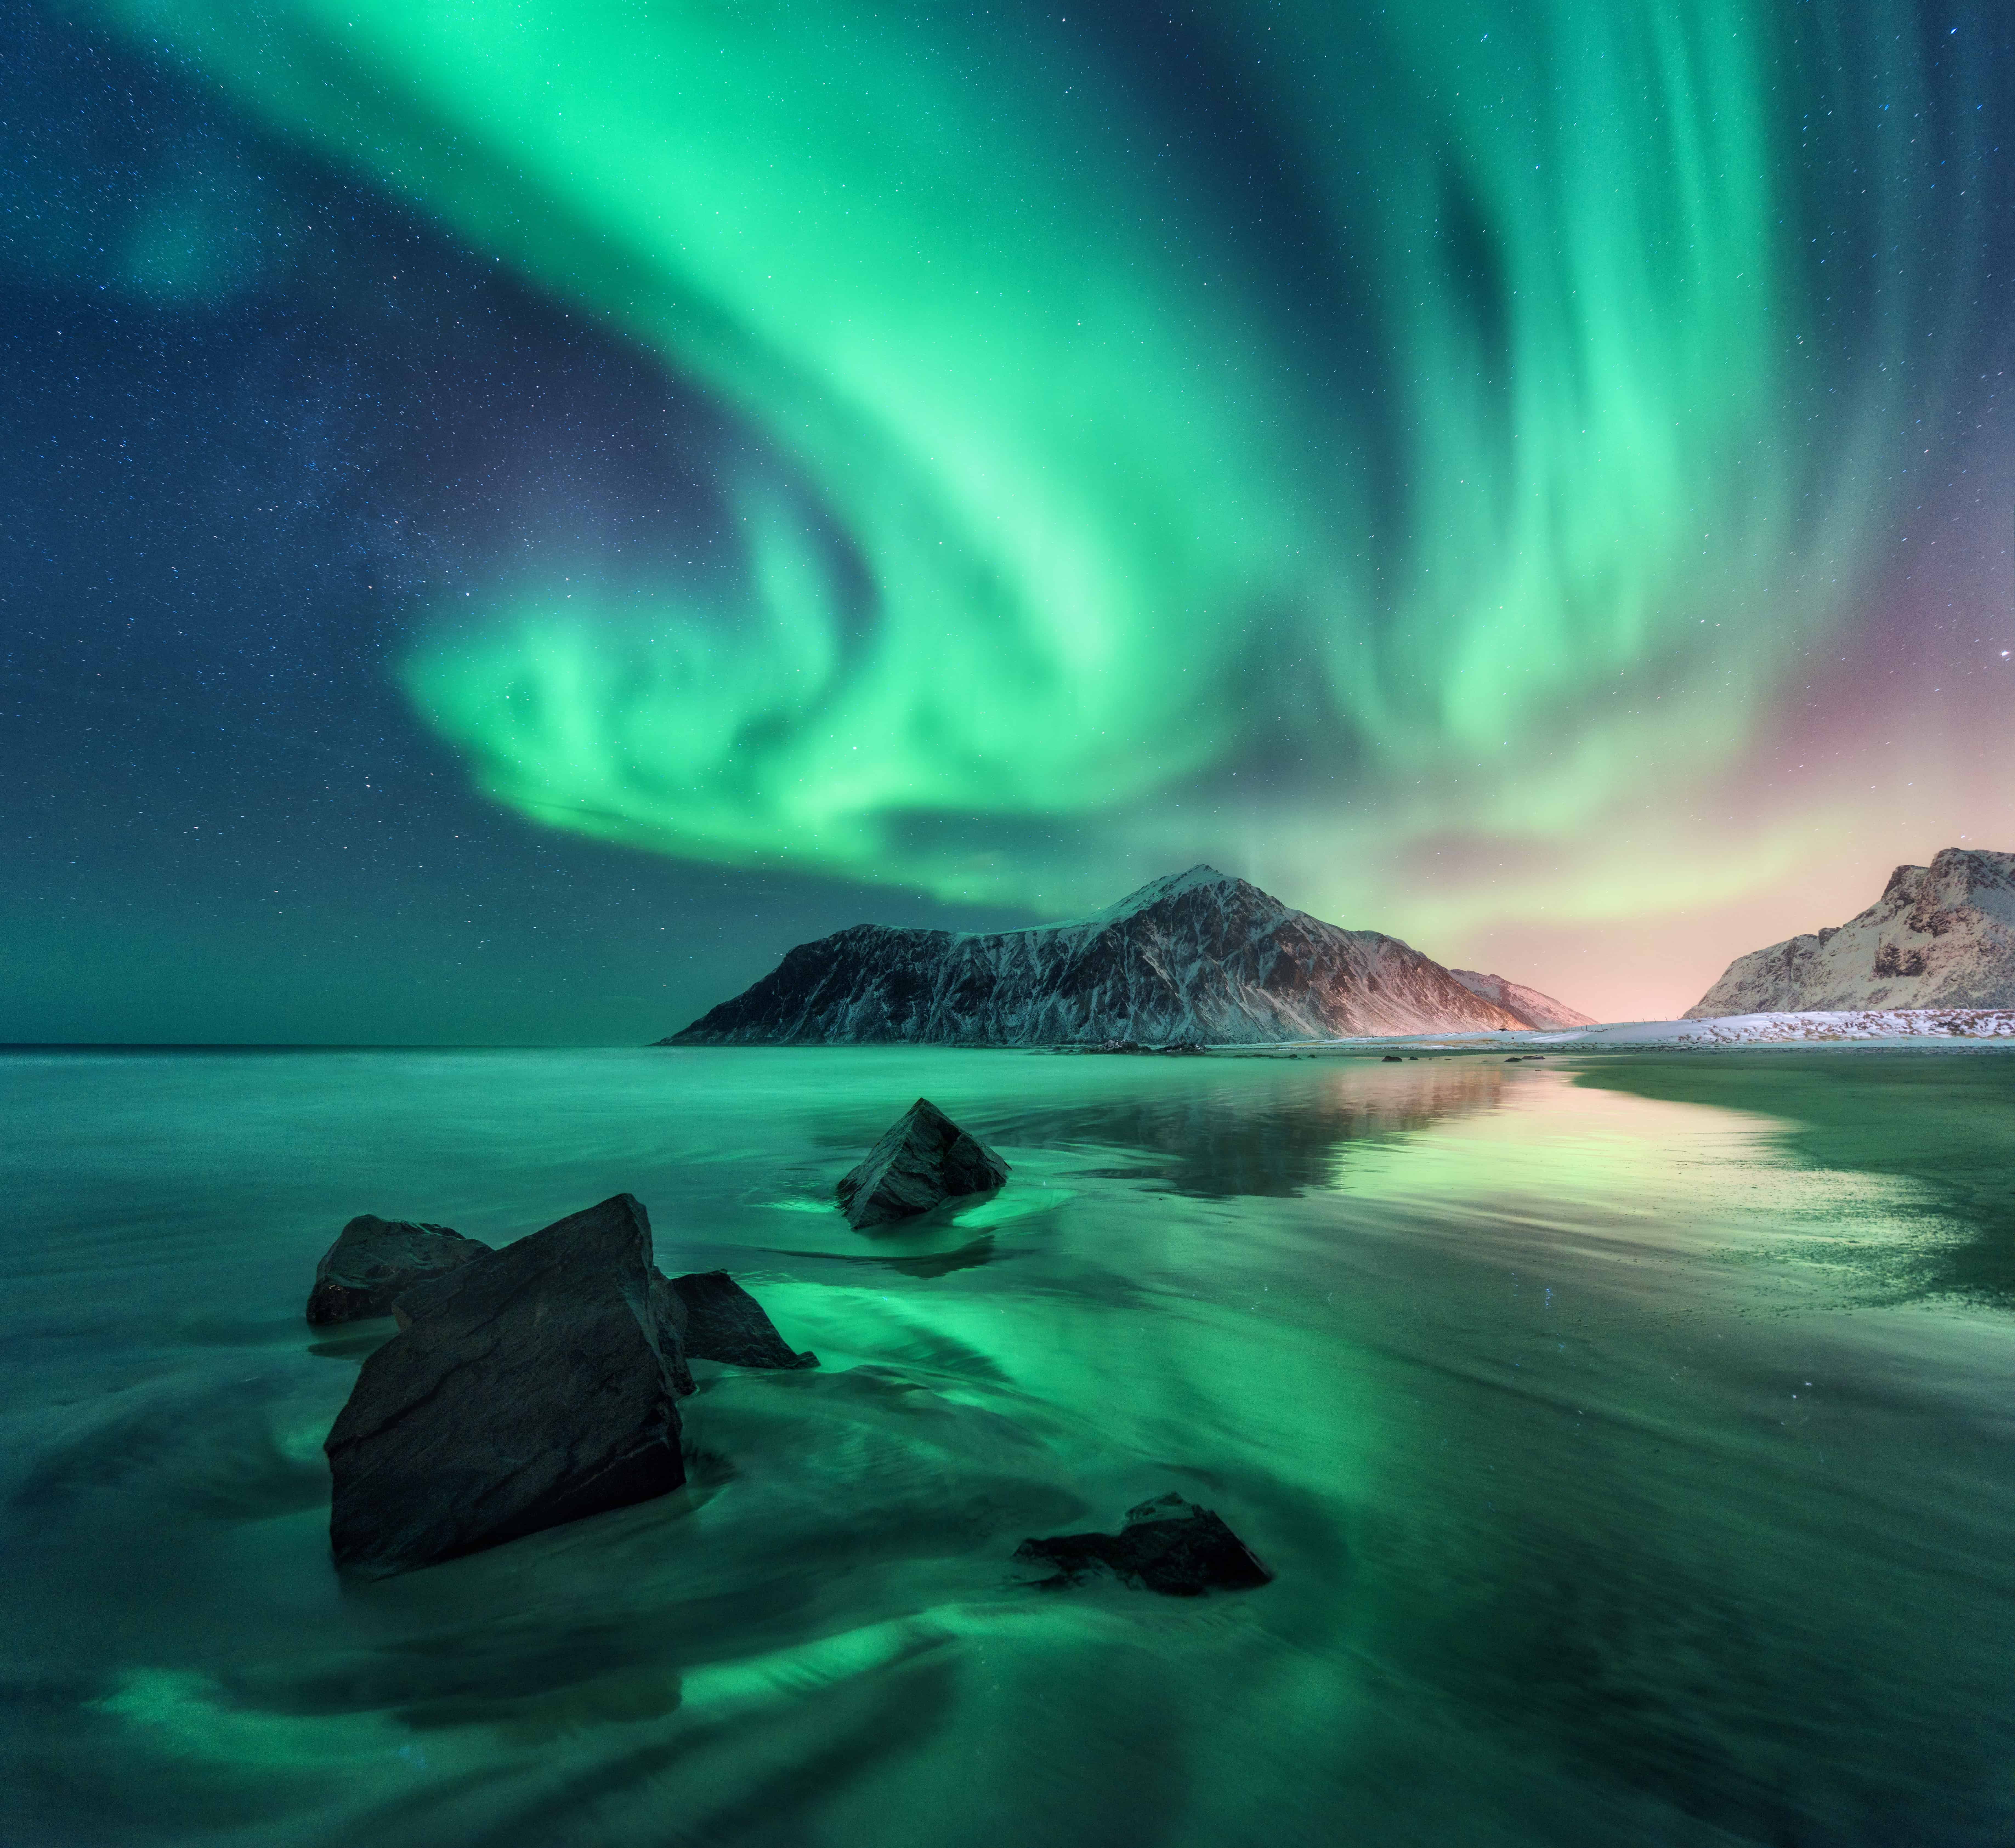 Aurora. Northern lights in Lofoten islands, Norway. Sky with polar lights, stars. Night winter landscape with aurora, sea with sky reflection, stones, sandy beach and mountains. Green aurora borealis • Travel with Bradley